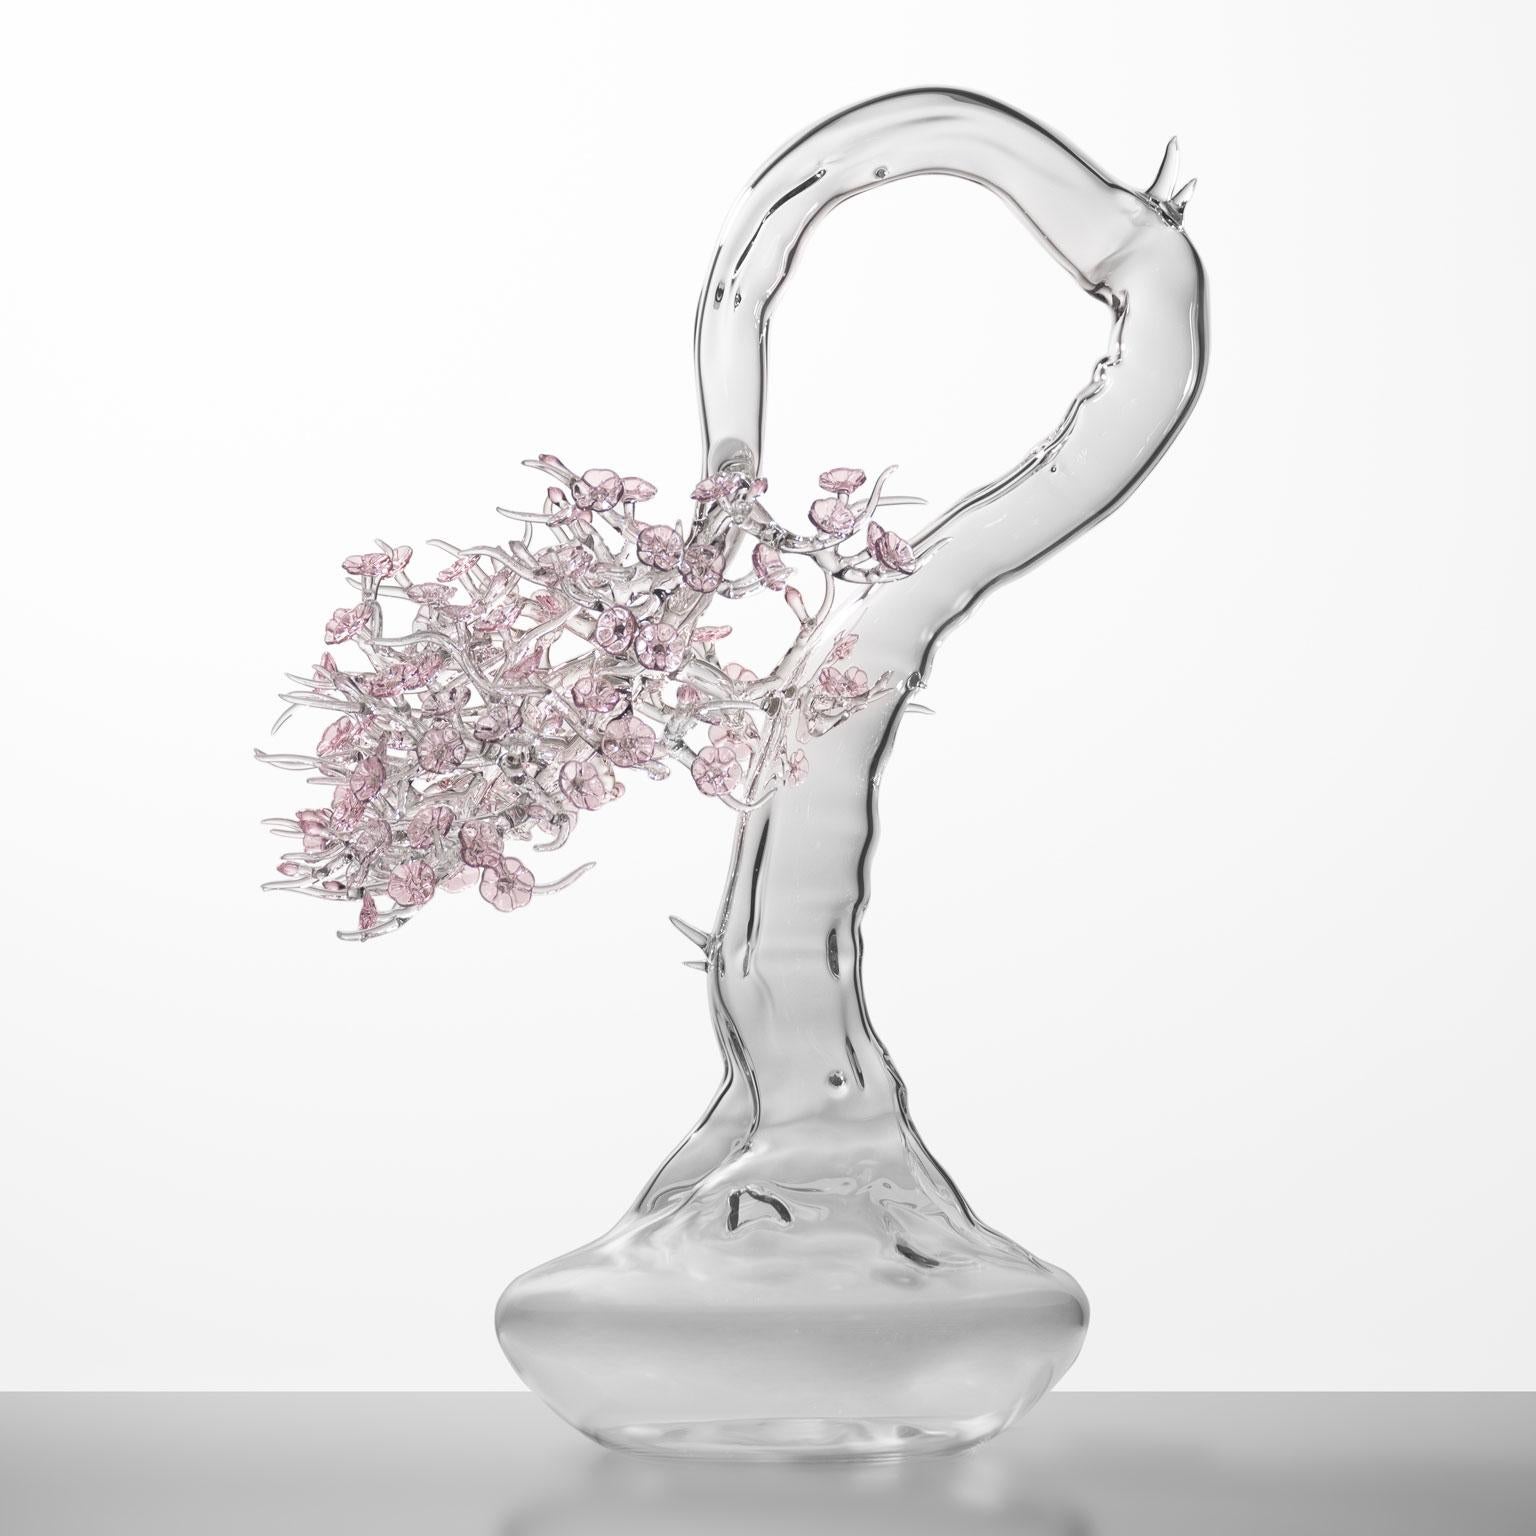 Introducing an exquisite Hand-Blown Glass Sculpture representing a bonsai tree in blossom, masterfully crafted by the renowned Italian artist Simone Crestani. This stunning sculpture encapsulates the delicate beauty and profound symbolism of a